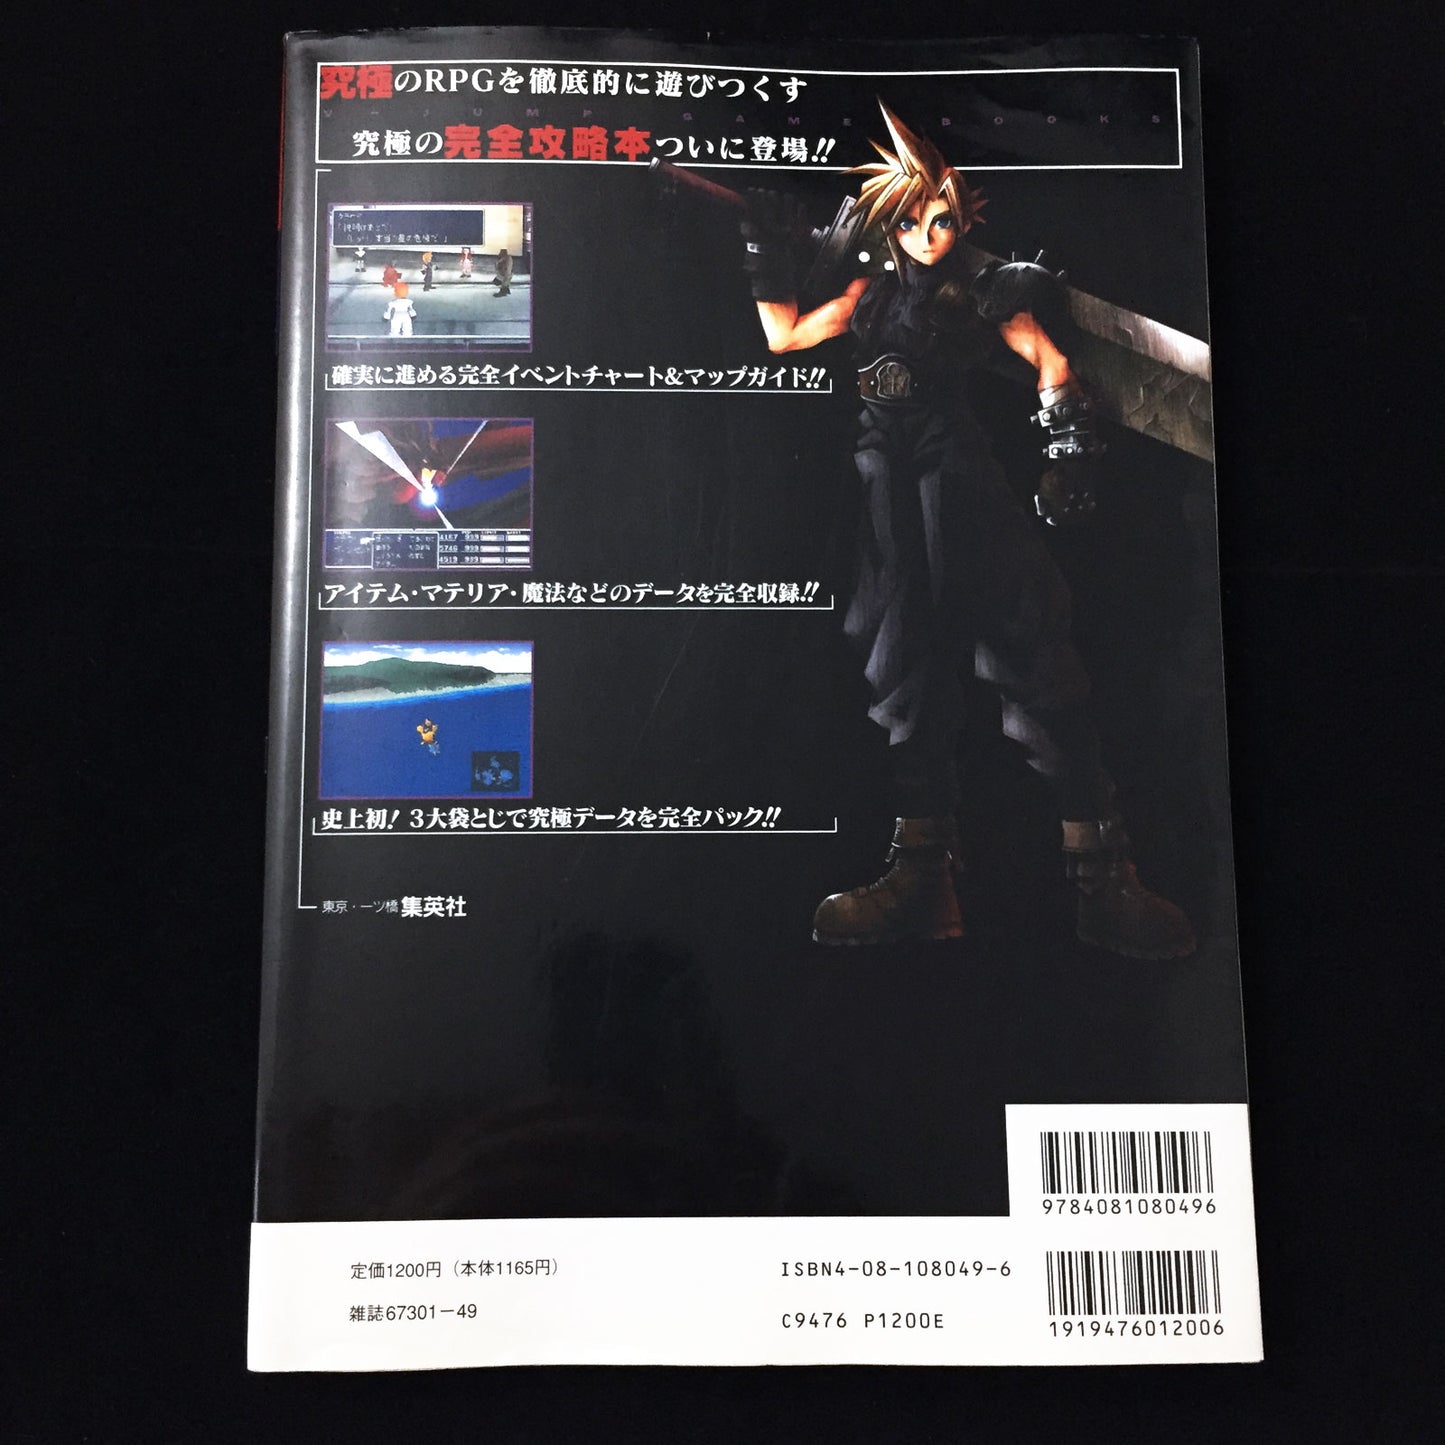 Final Fantasy 7 THE PERFECT